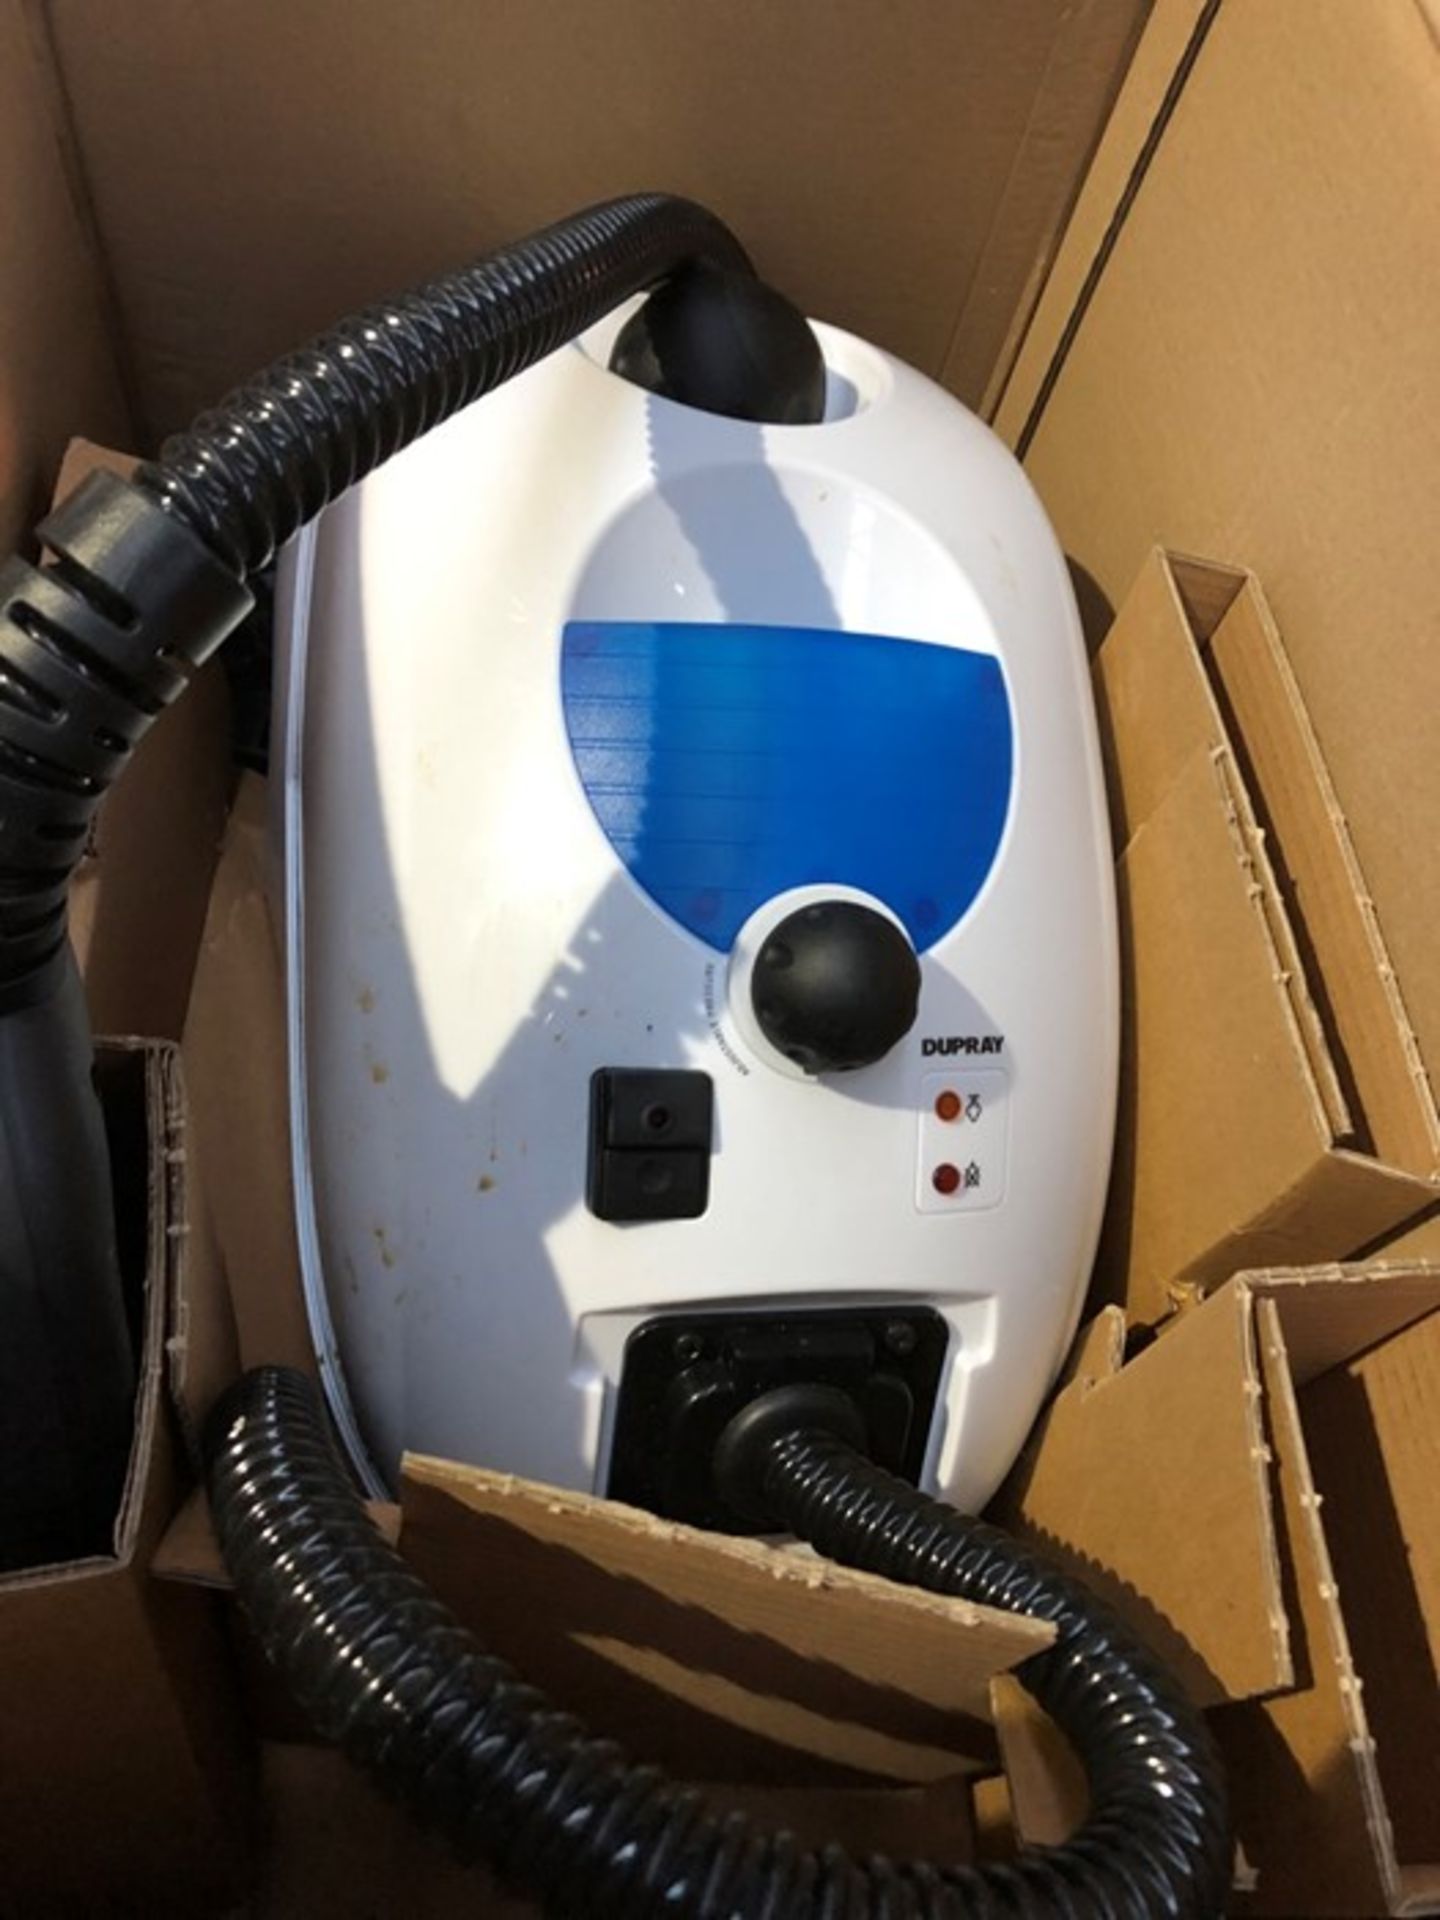 1 BOXED DUPRAY STEAM CLEANER / RRP £144.99 (PUBLIC VIEWING AVAILABLE)